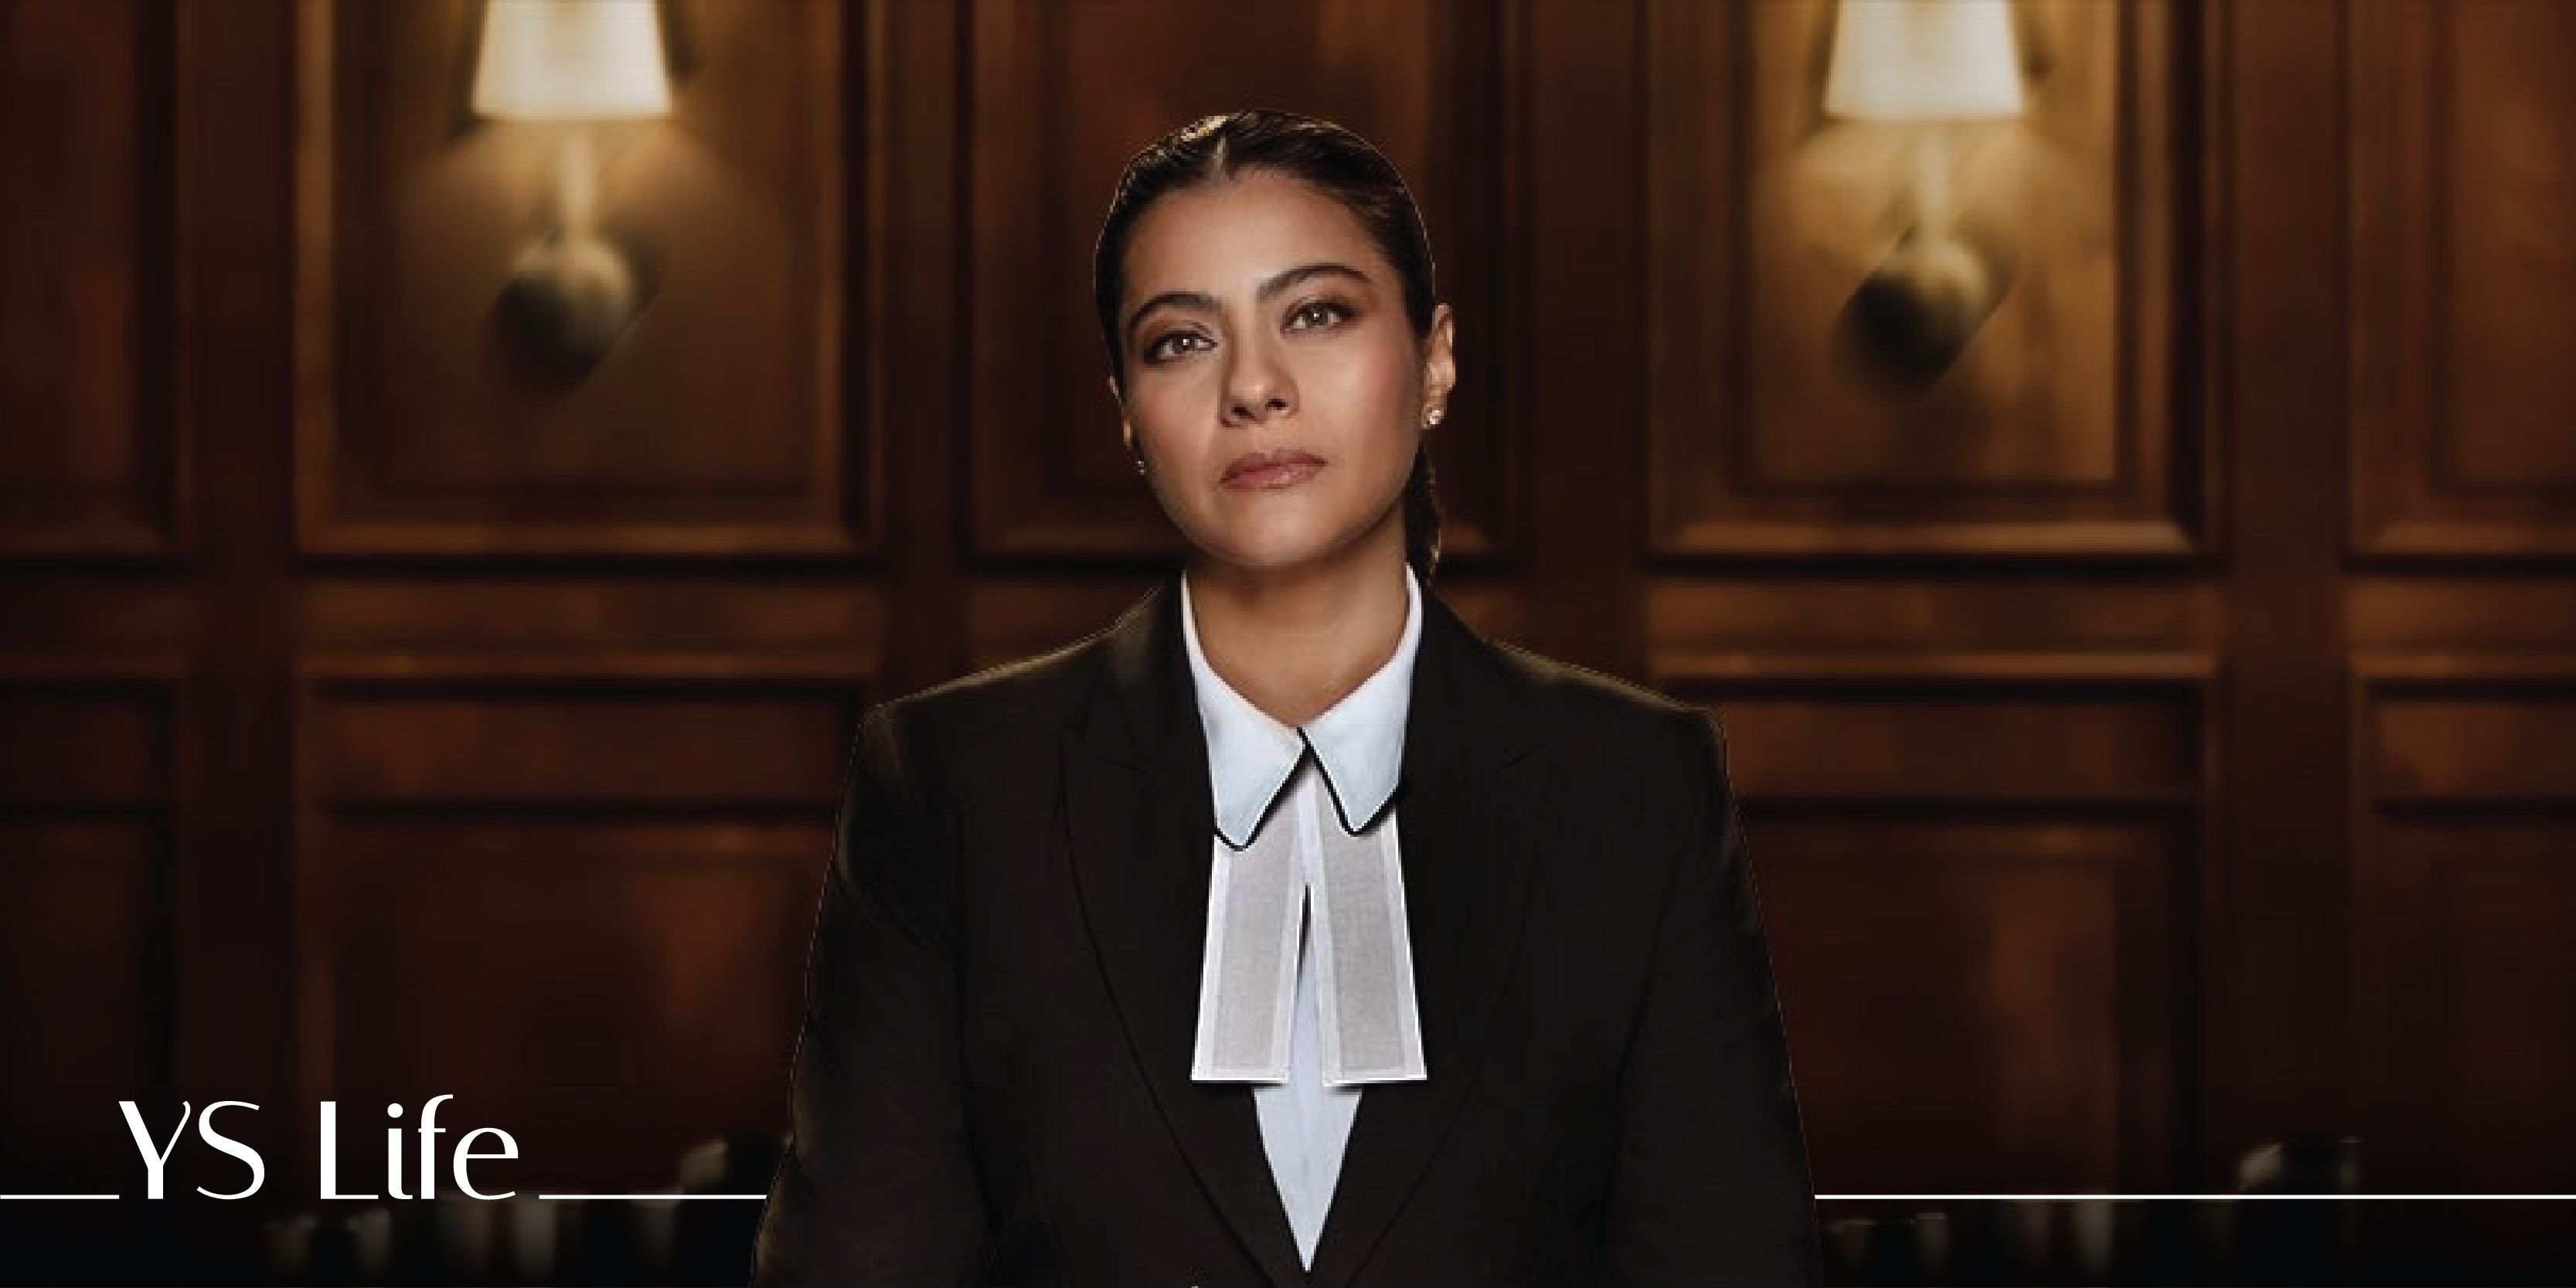 Kajol delivers a winning performance, but The Trial could have excelled with sharper writing